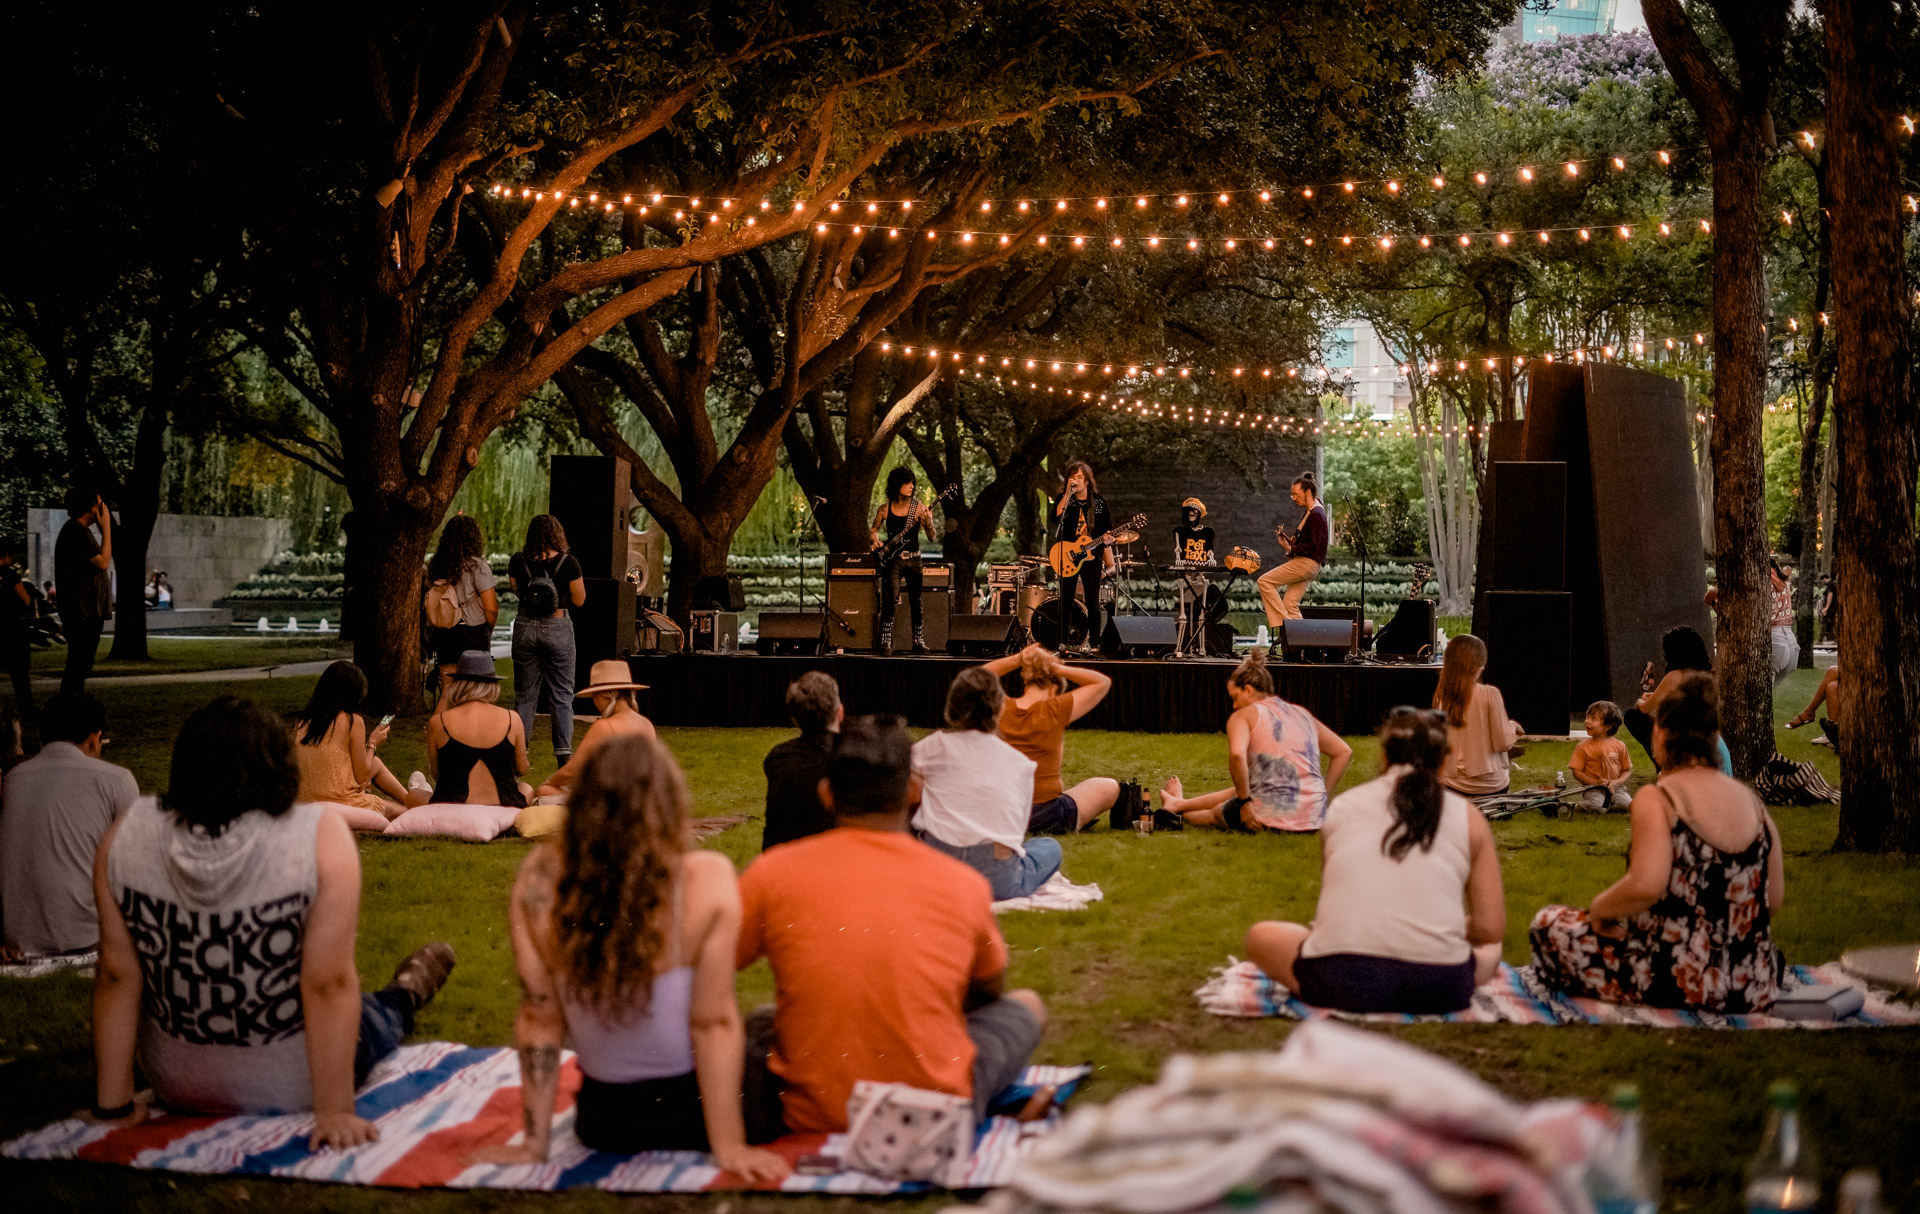 A wide shot of musicians on a stage and people sitting on blankets on grass